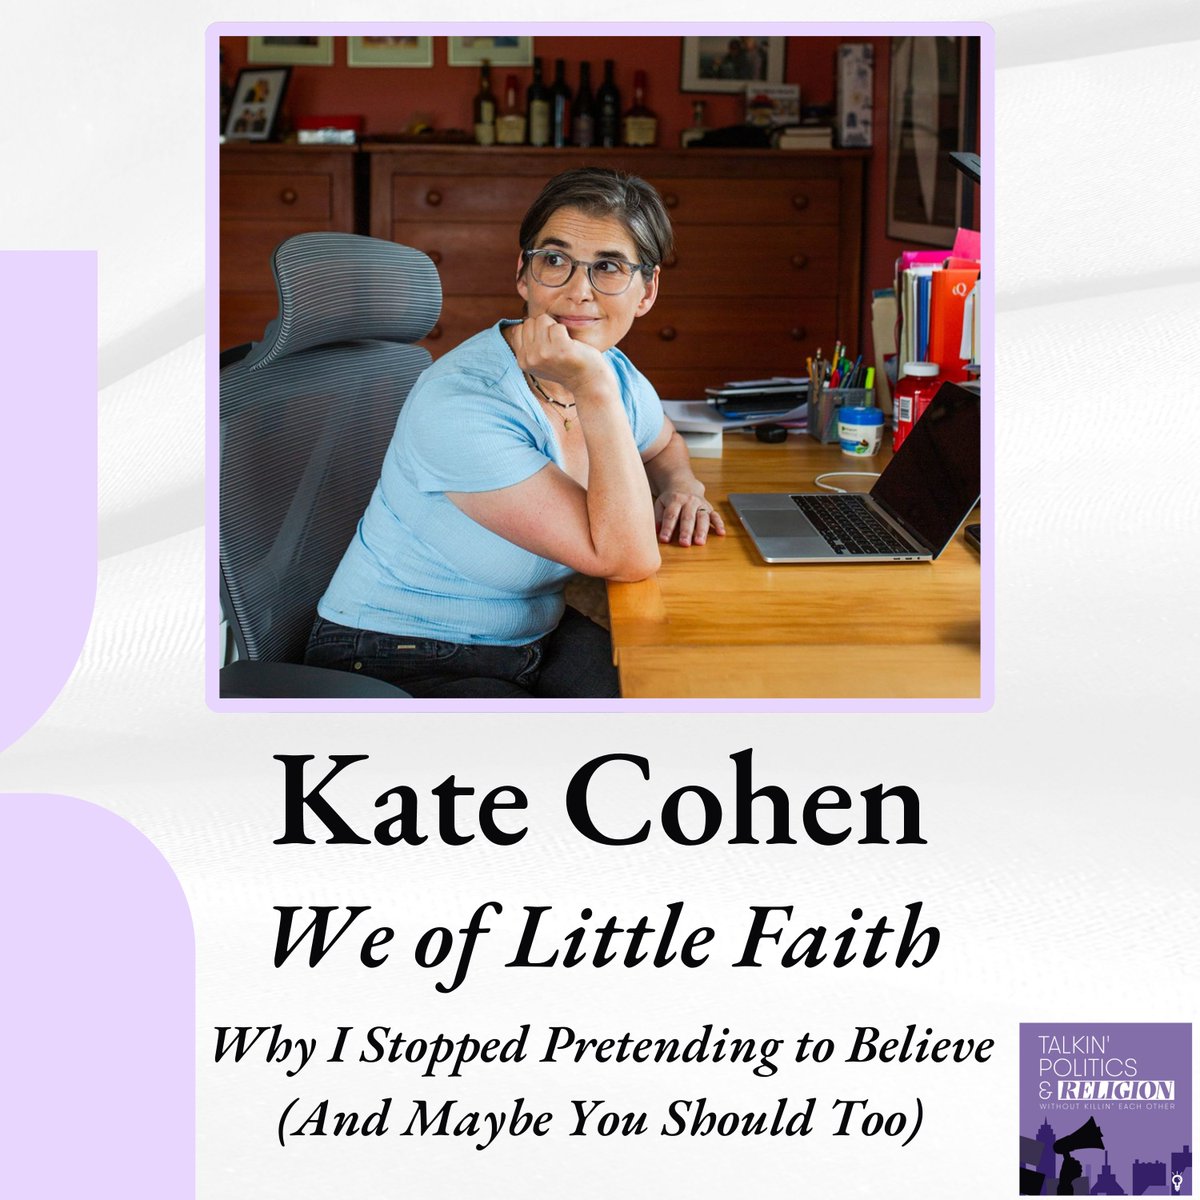 Sometimes, even though there seem to be so many differences, you just connect with a person. That was def the case w my new friend @KateCohen92 of @washingtonpost. Kate's latest book is WE OF LITTLE FAITH (@GodinePub). So we had much to discuss. apple.co/3JAkRGw